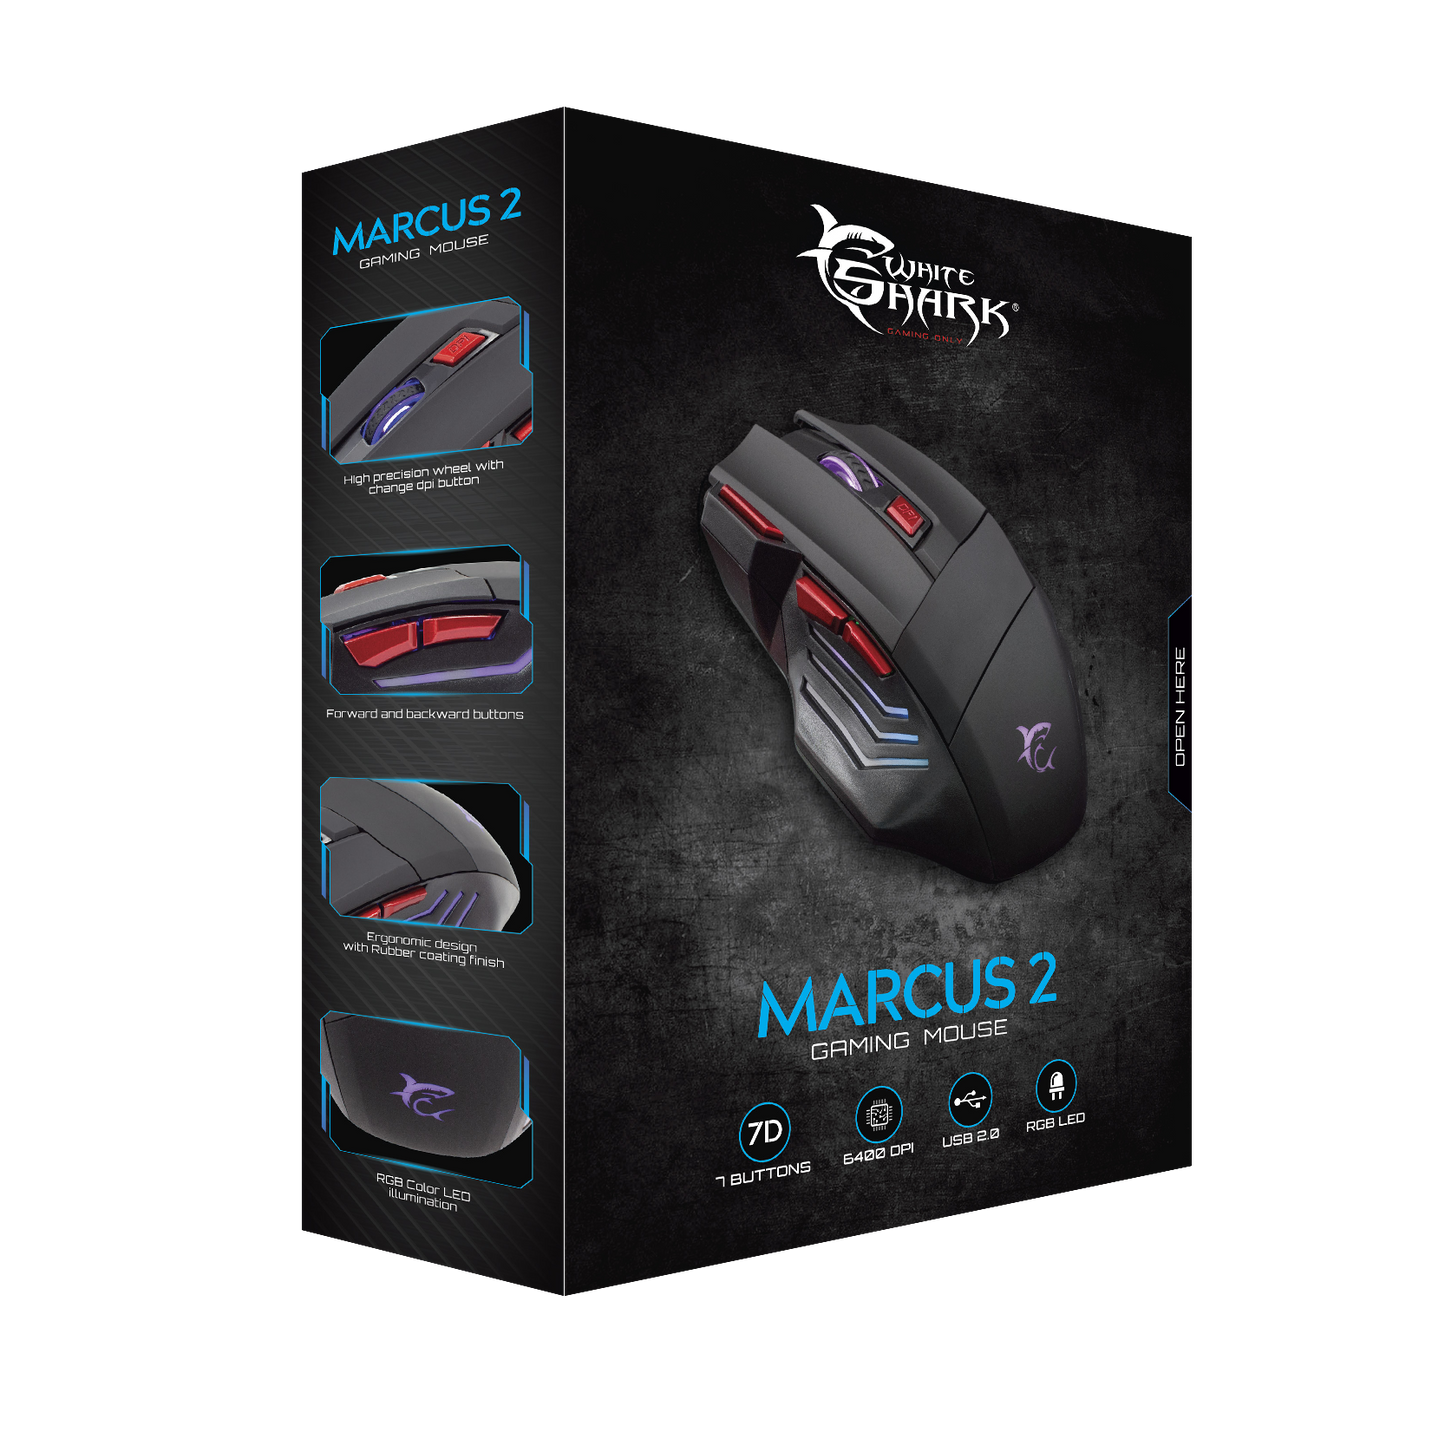 MARCUS-2 Gaming Mouse - The AzTech